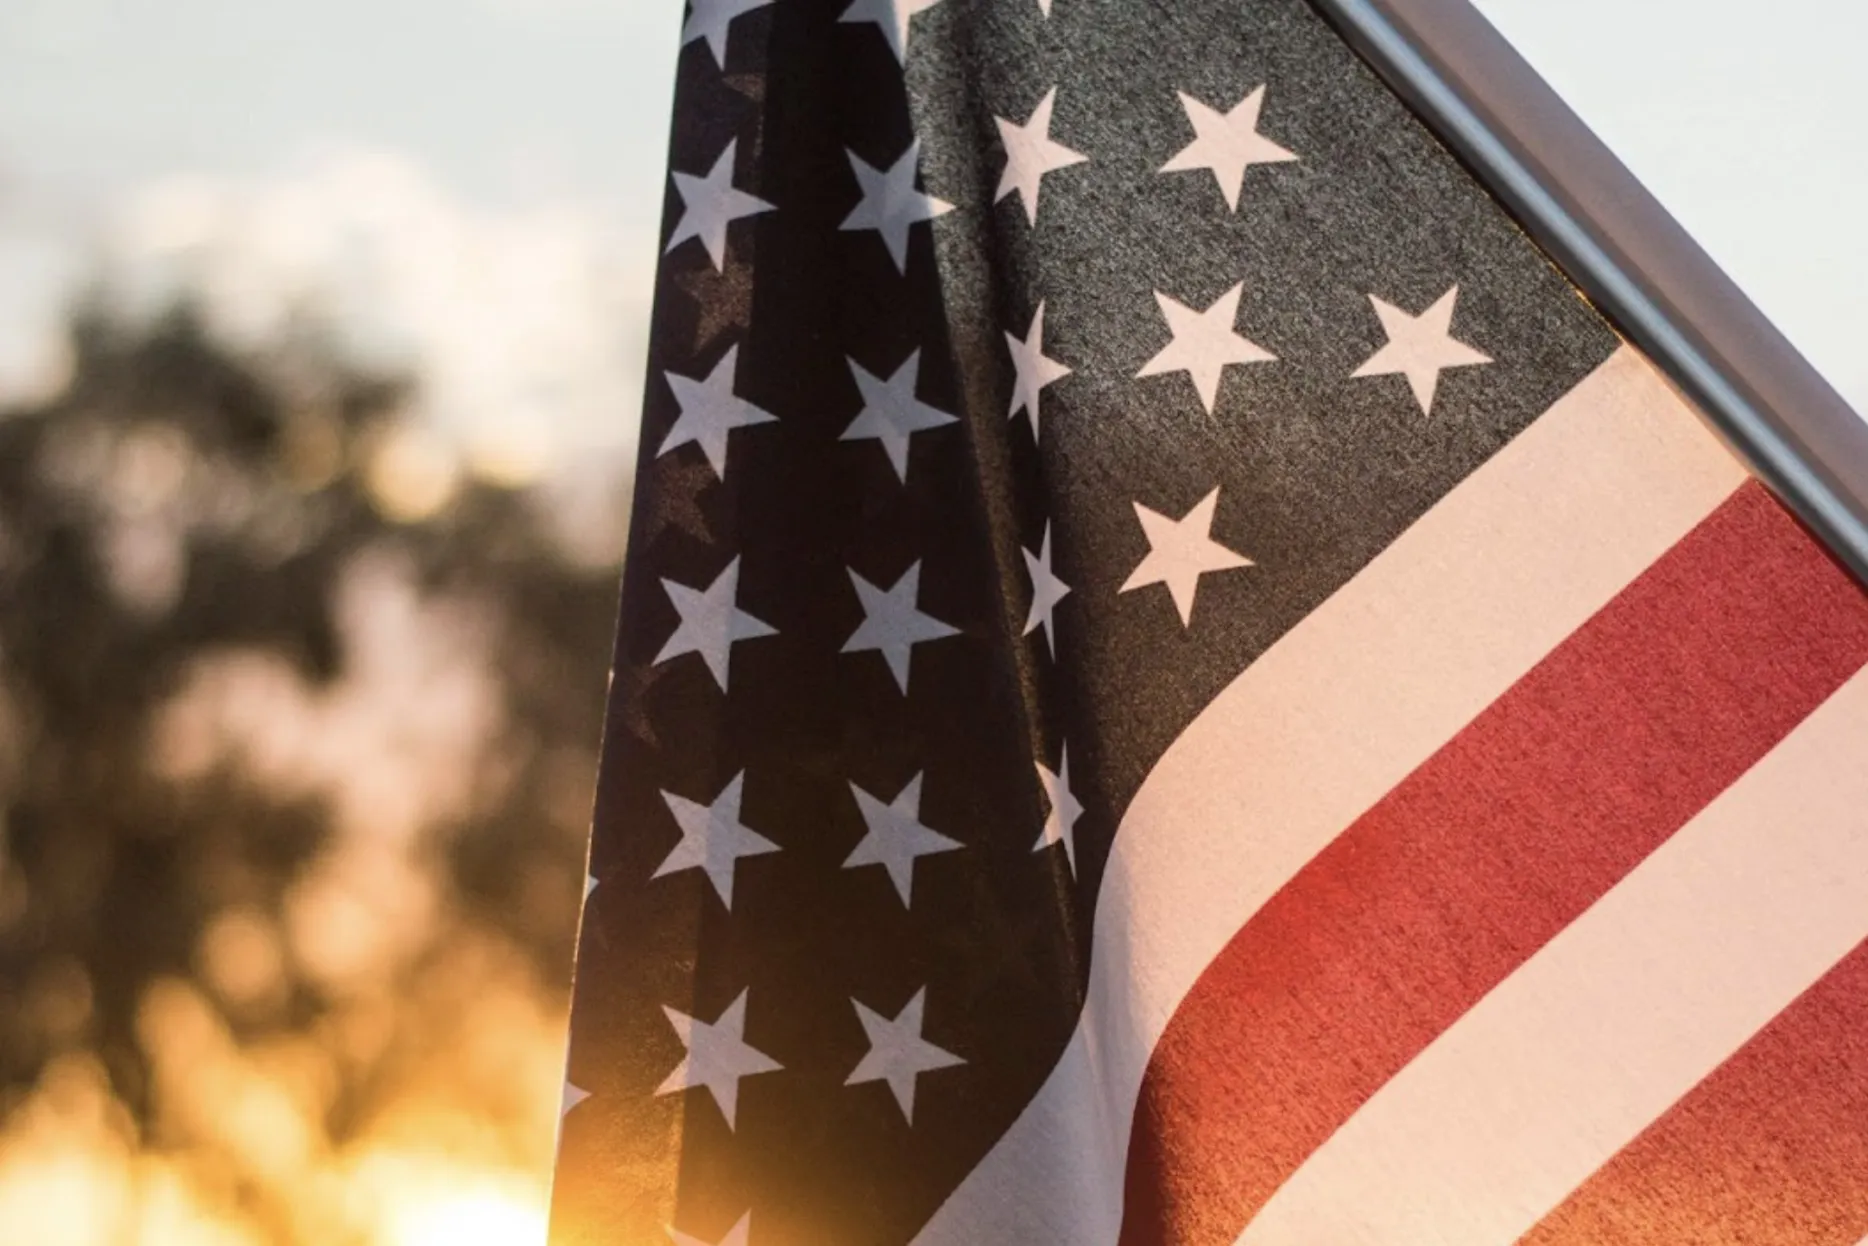 A close up of the American flag with the setting sun behind